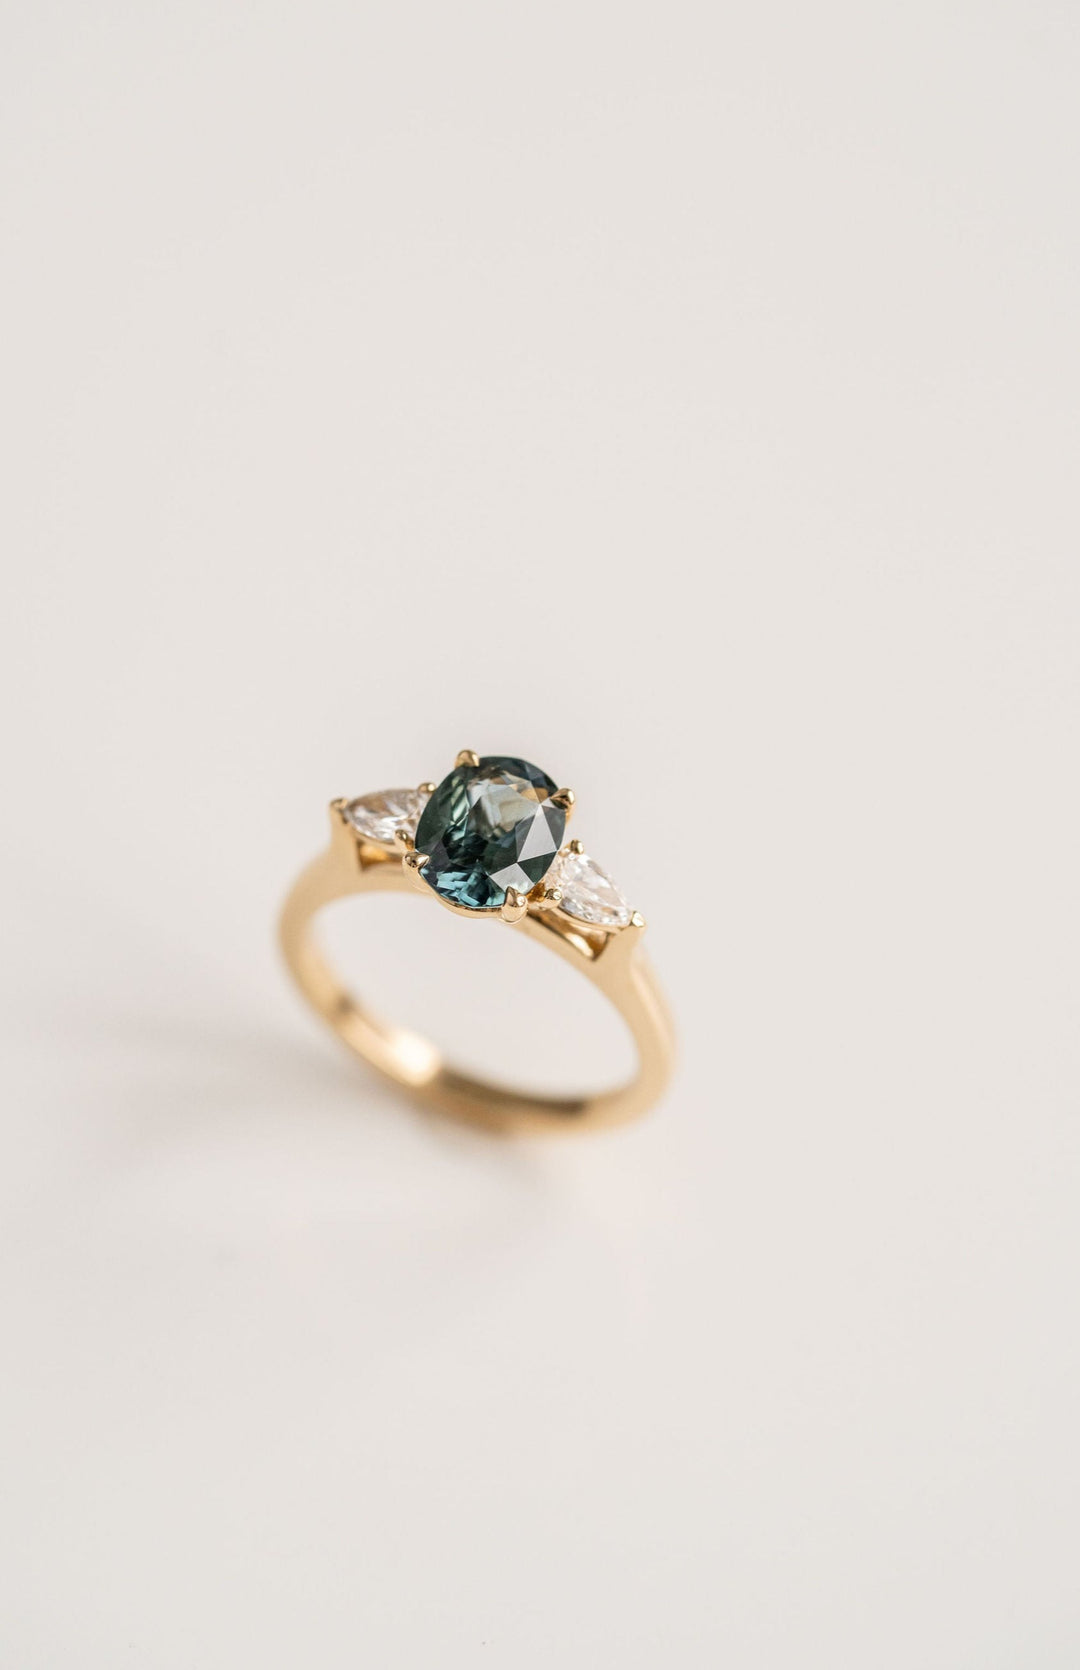 1.59ct. Oval Blue-Green Sri Lankan Sapphire Engagement Ring With Pear Shape Diamond Accents, 14k Yellow Gold